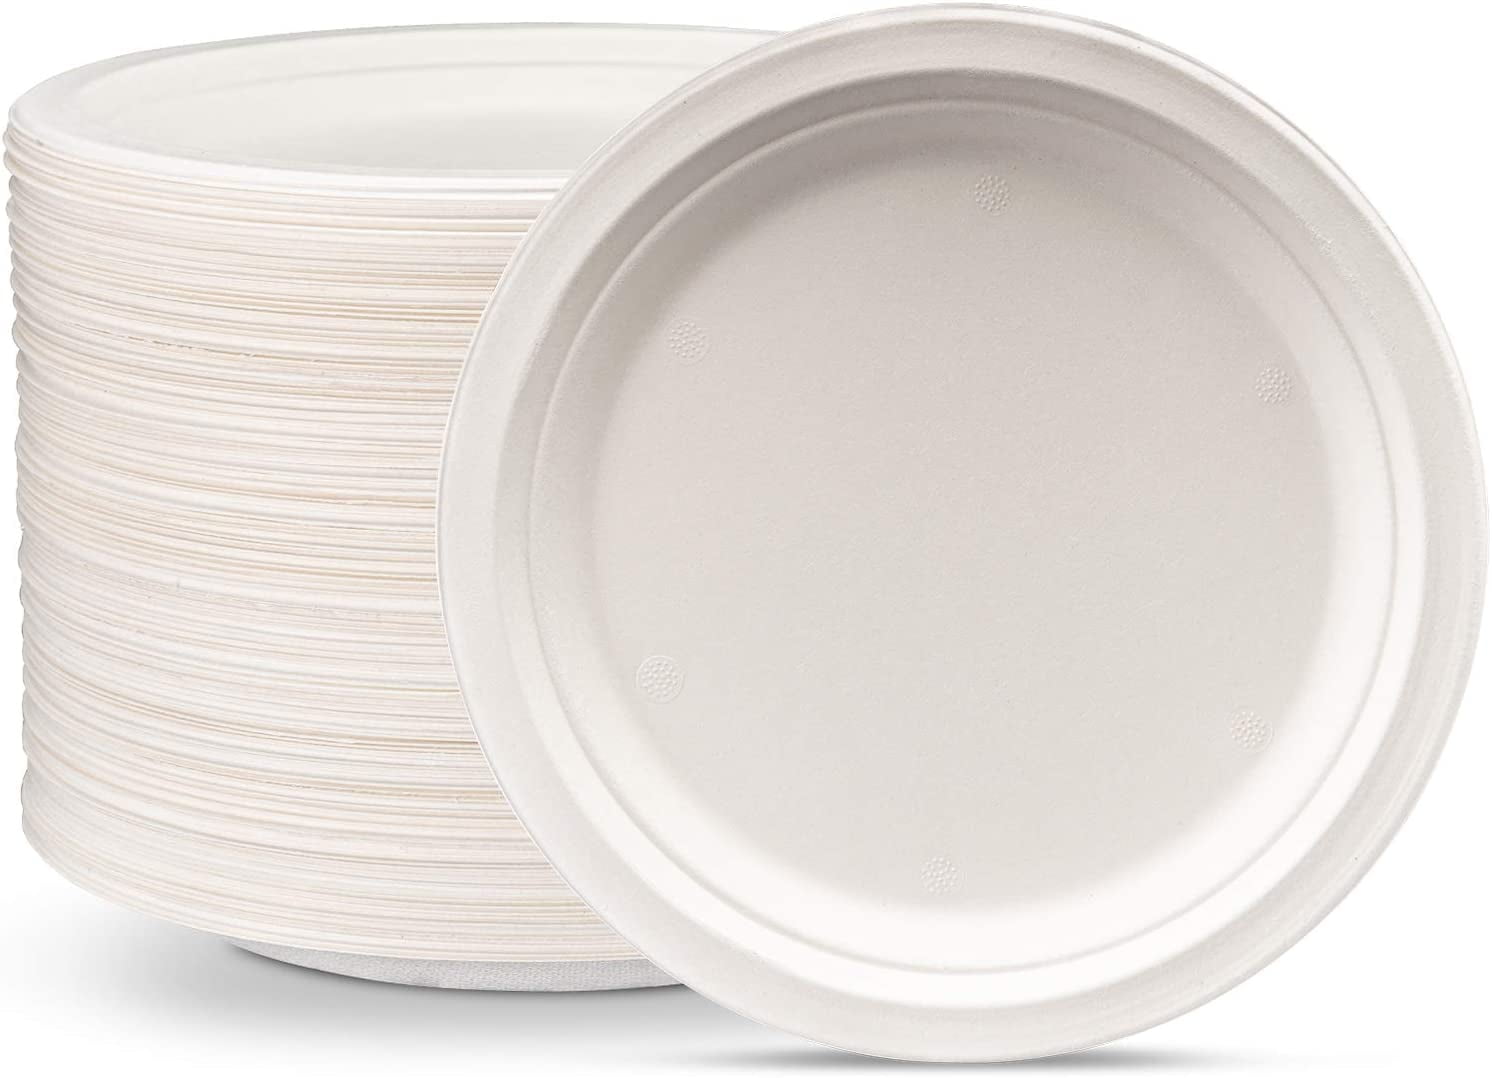  Moretoes 125 Pack 10 Inch Compostable Paper Plates Disposable  Dinner Size Paper Plates Biodegradable Heavy-Duty Bagasse Plate (White) :  Health & Household